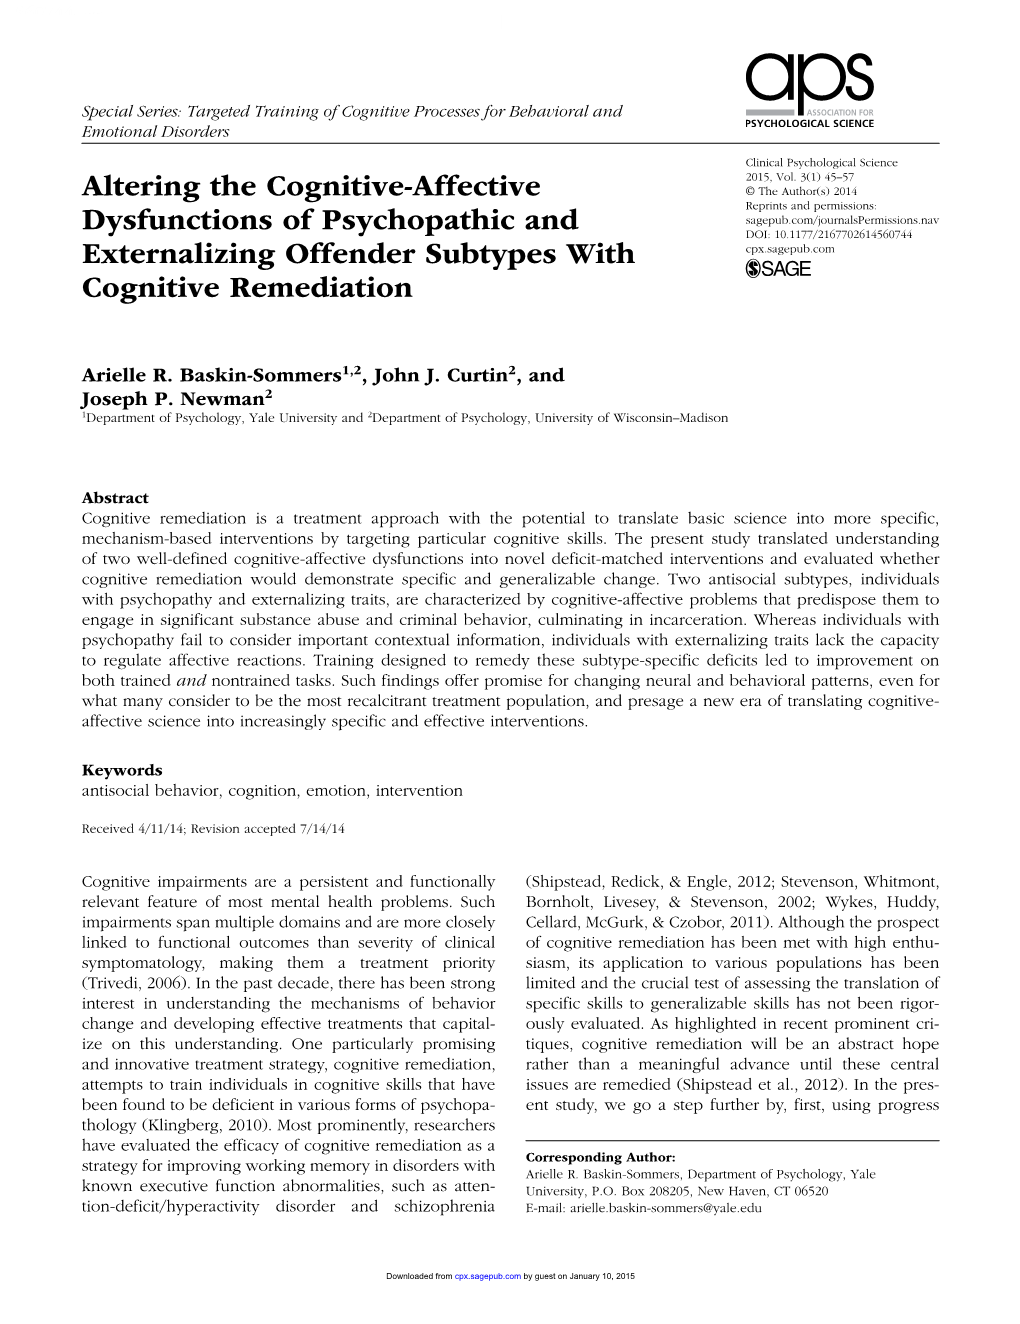 Altering the Cognitive-Affective Dysfunctions of Psychopathic And